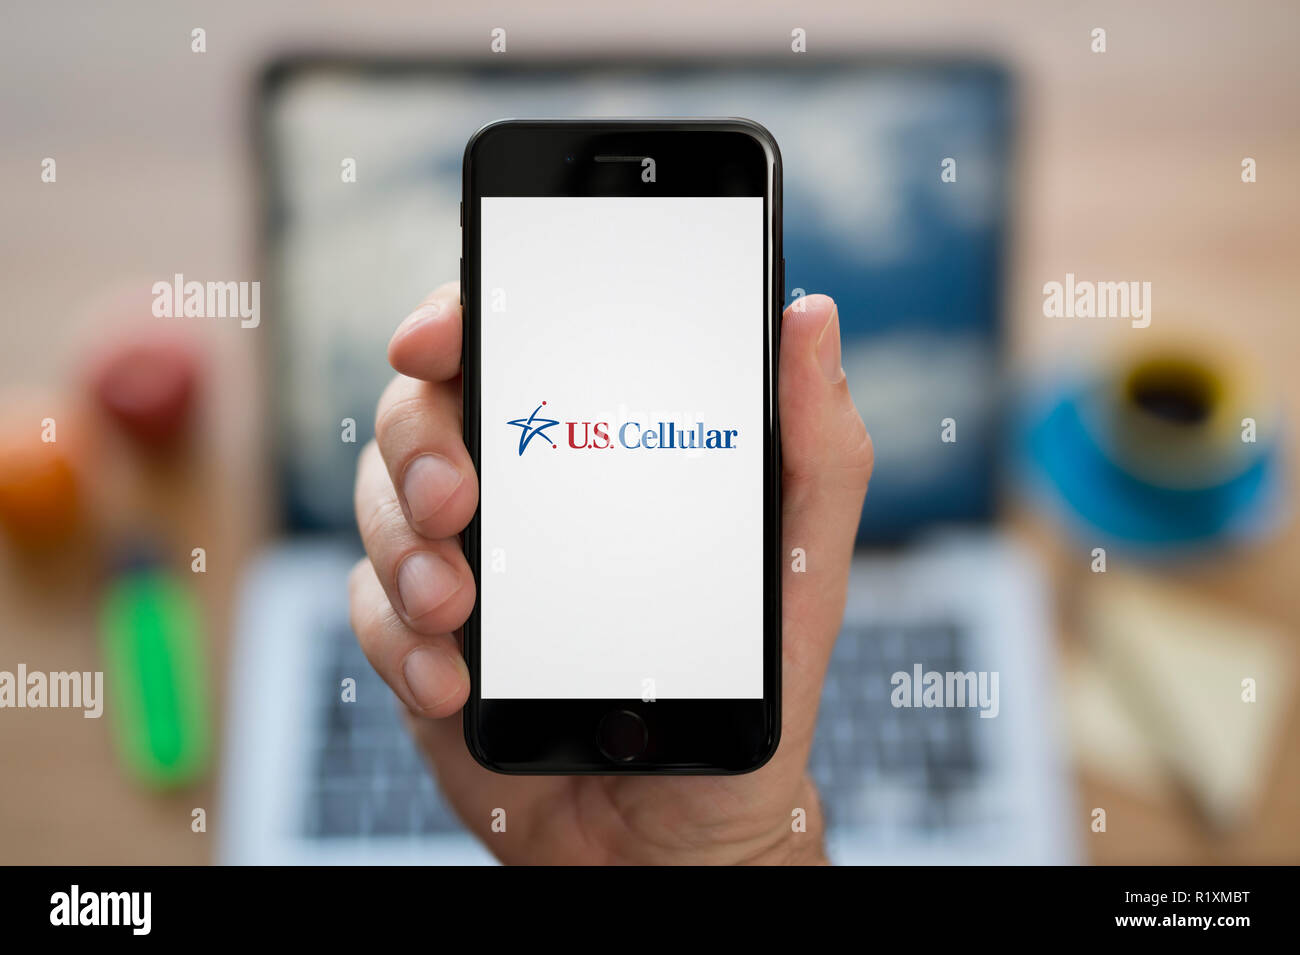 A man looks at his iPhone which displays the US Cellular logo, while sat at his computer desk (Editorial use only). Stock Photo